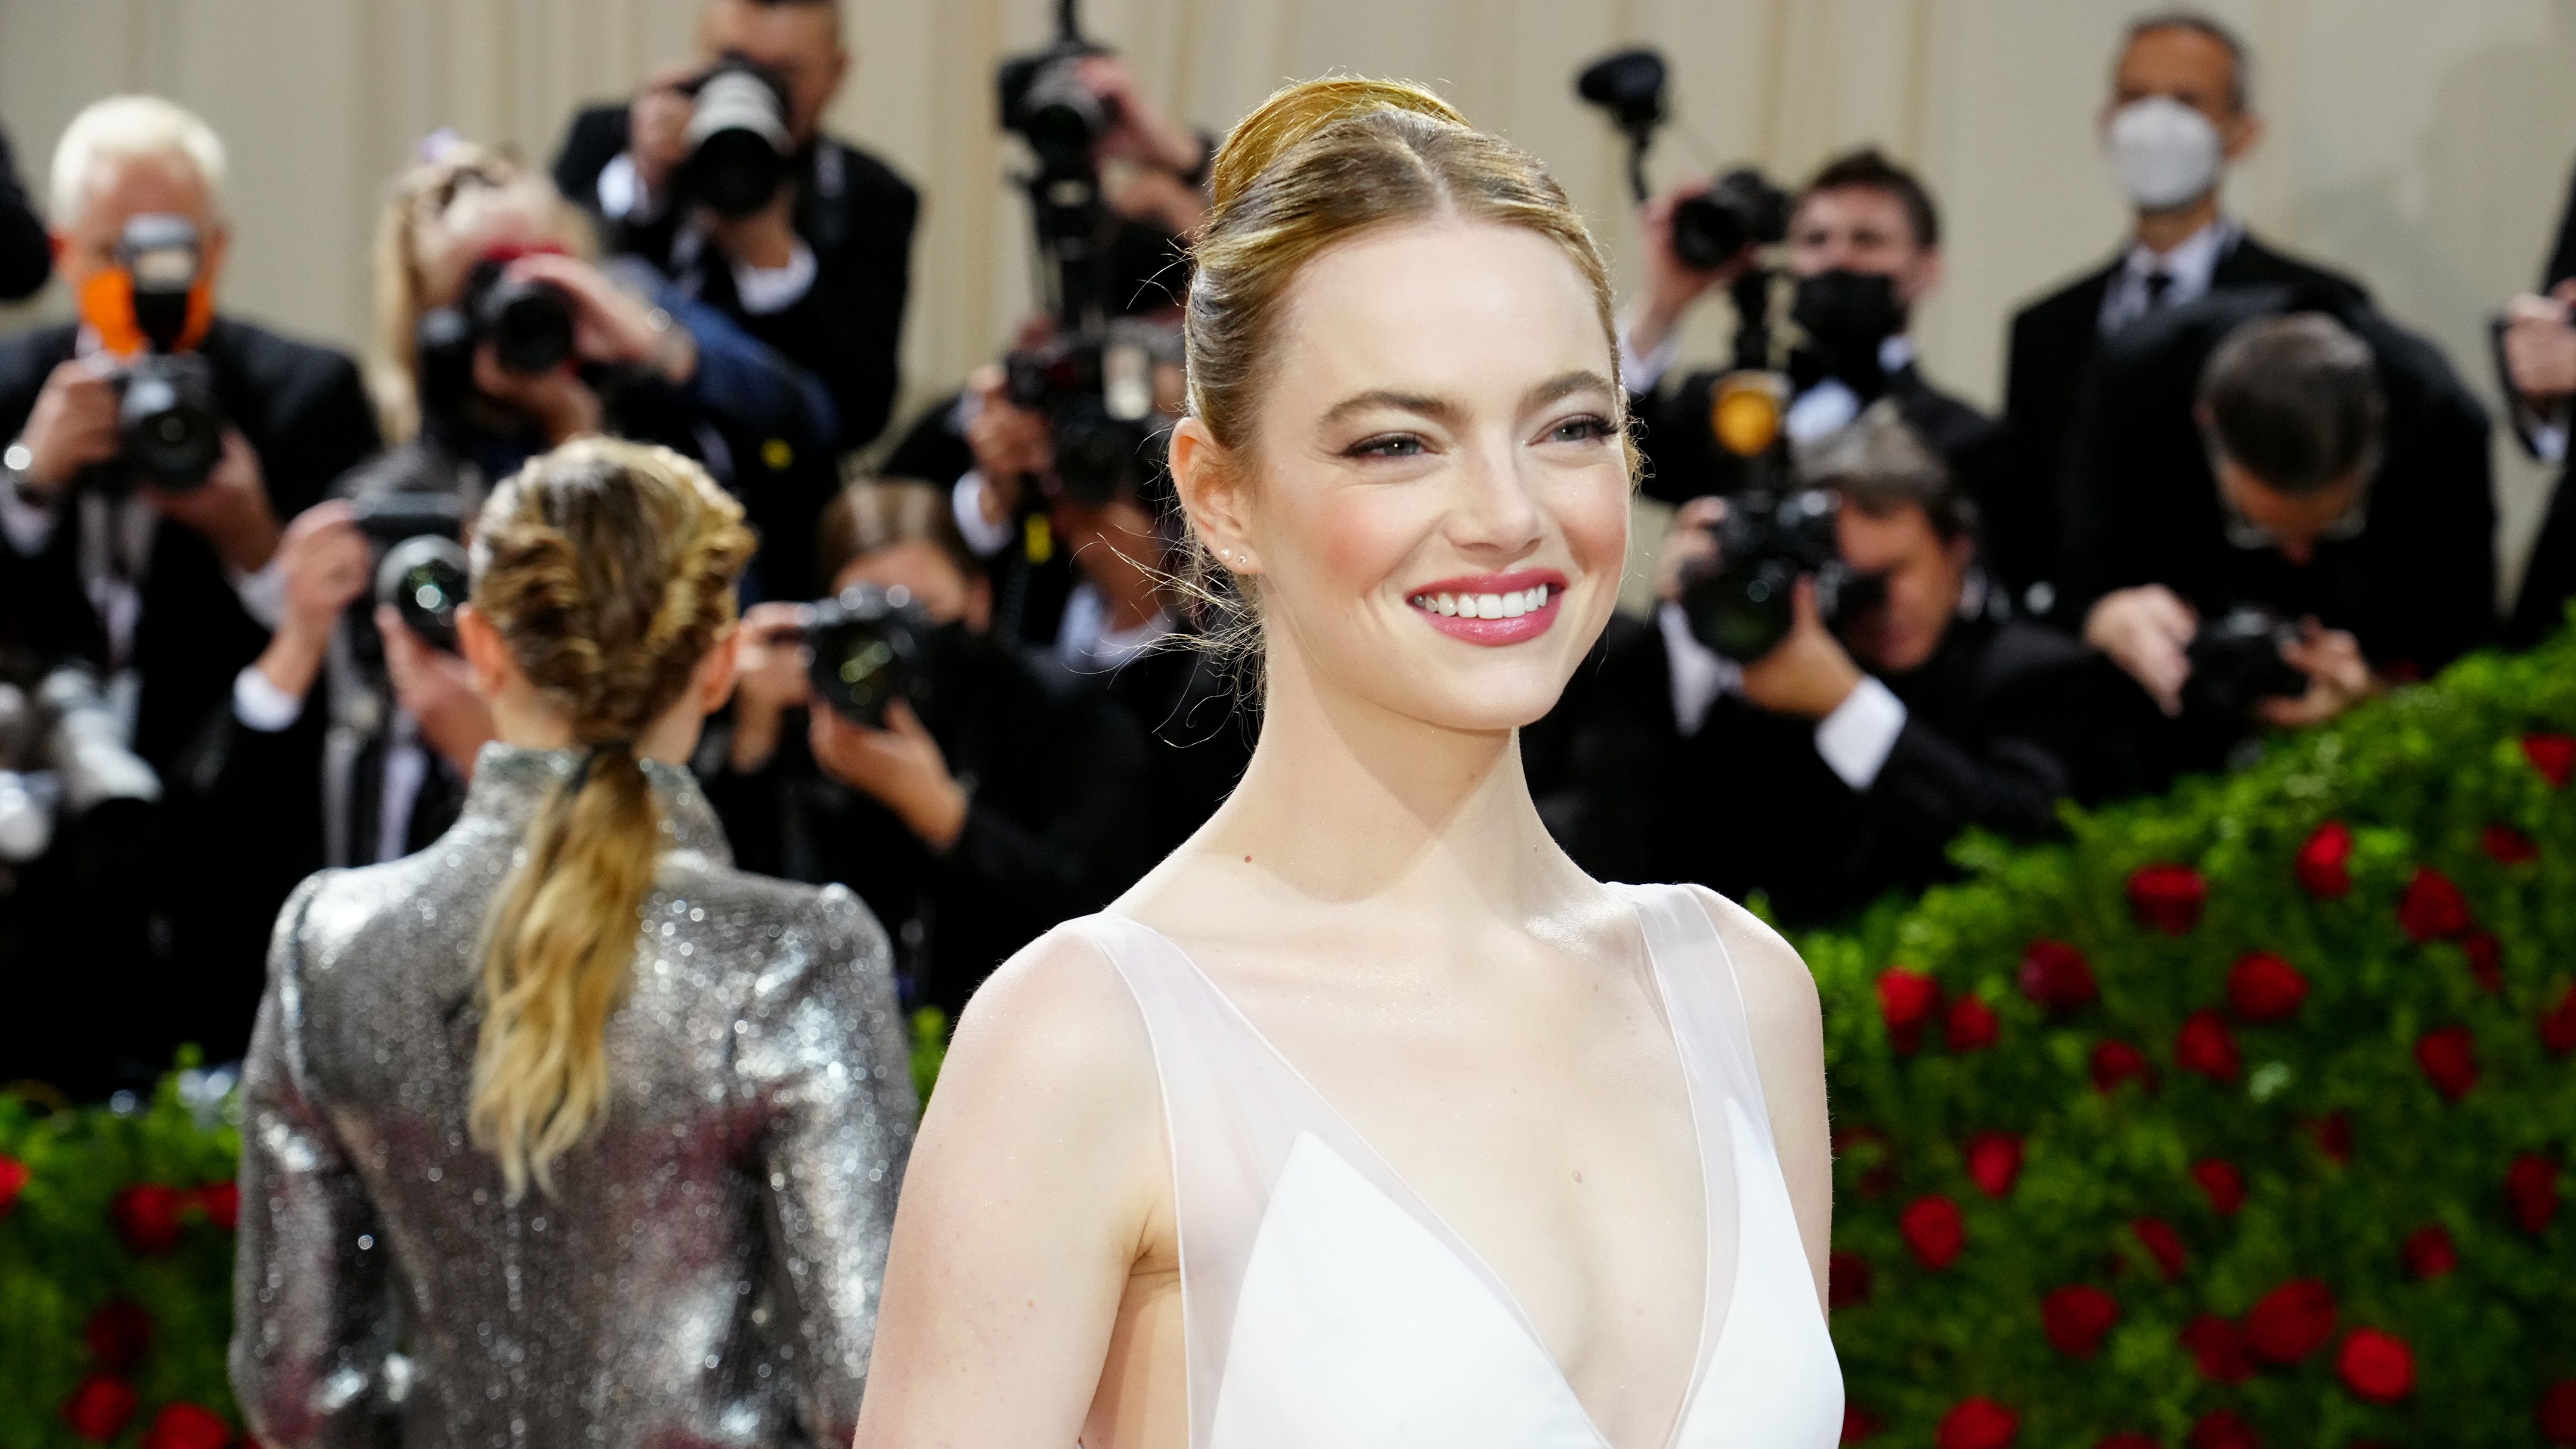 Emma Stone Re-wore Her Wedding Dress to the Met Gala